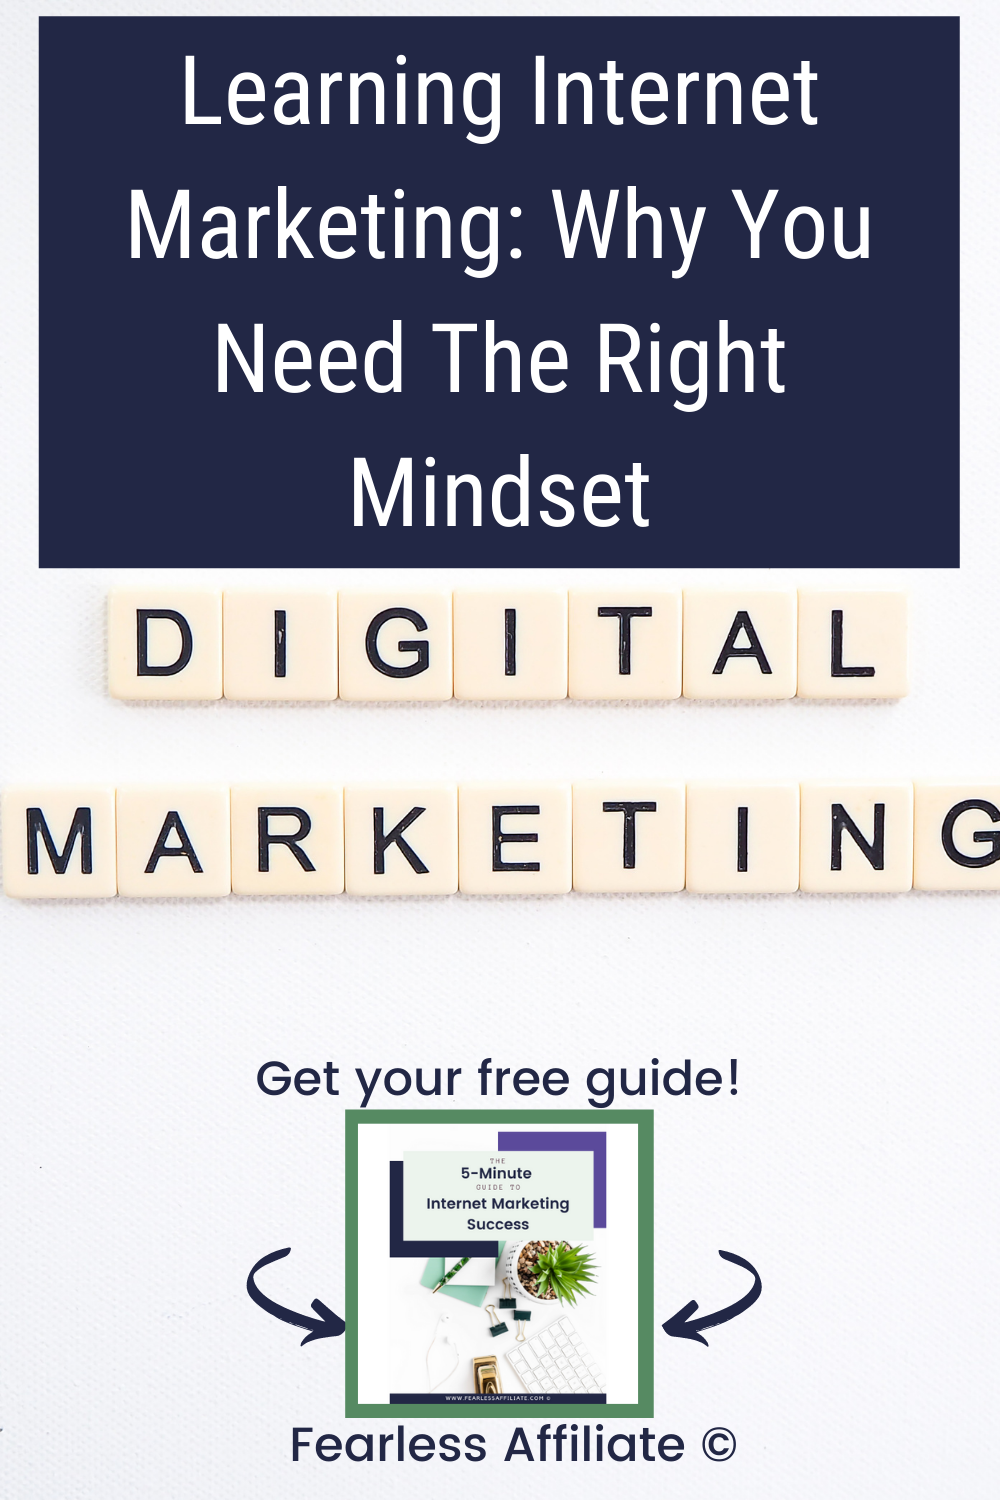 Learning Internet Marketing: Why You Need The Right Mindset